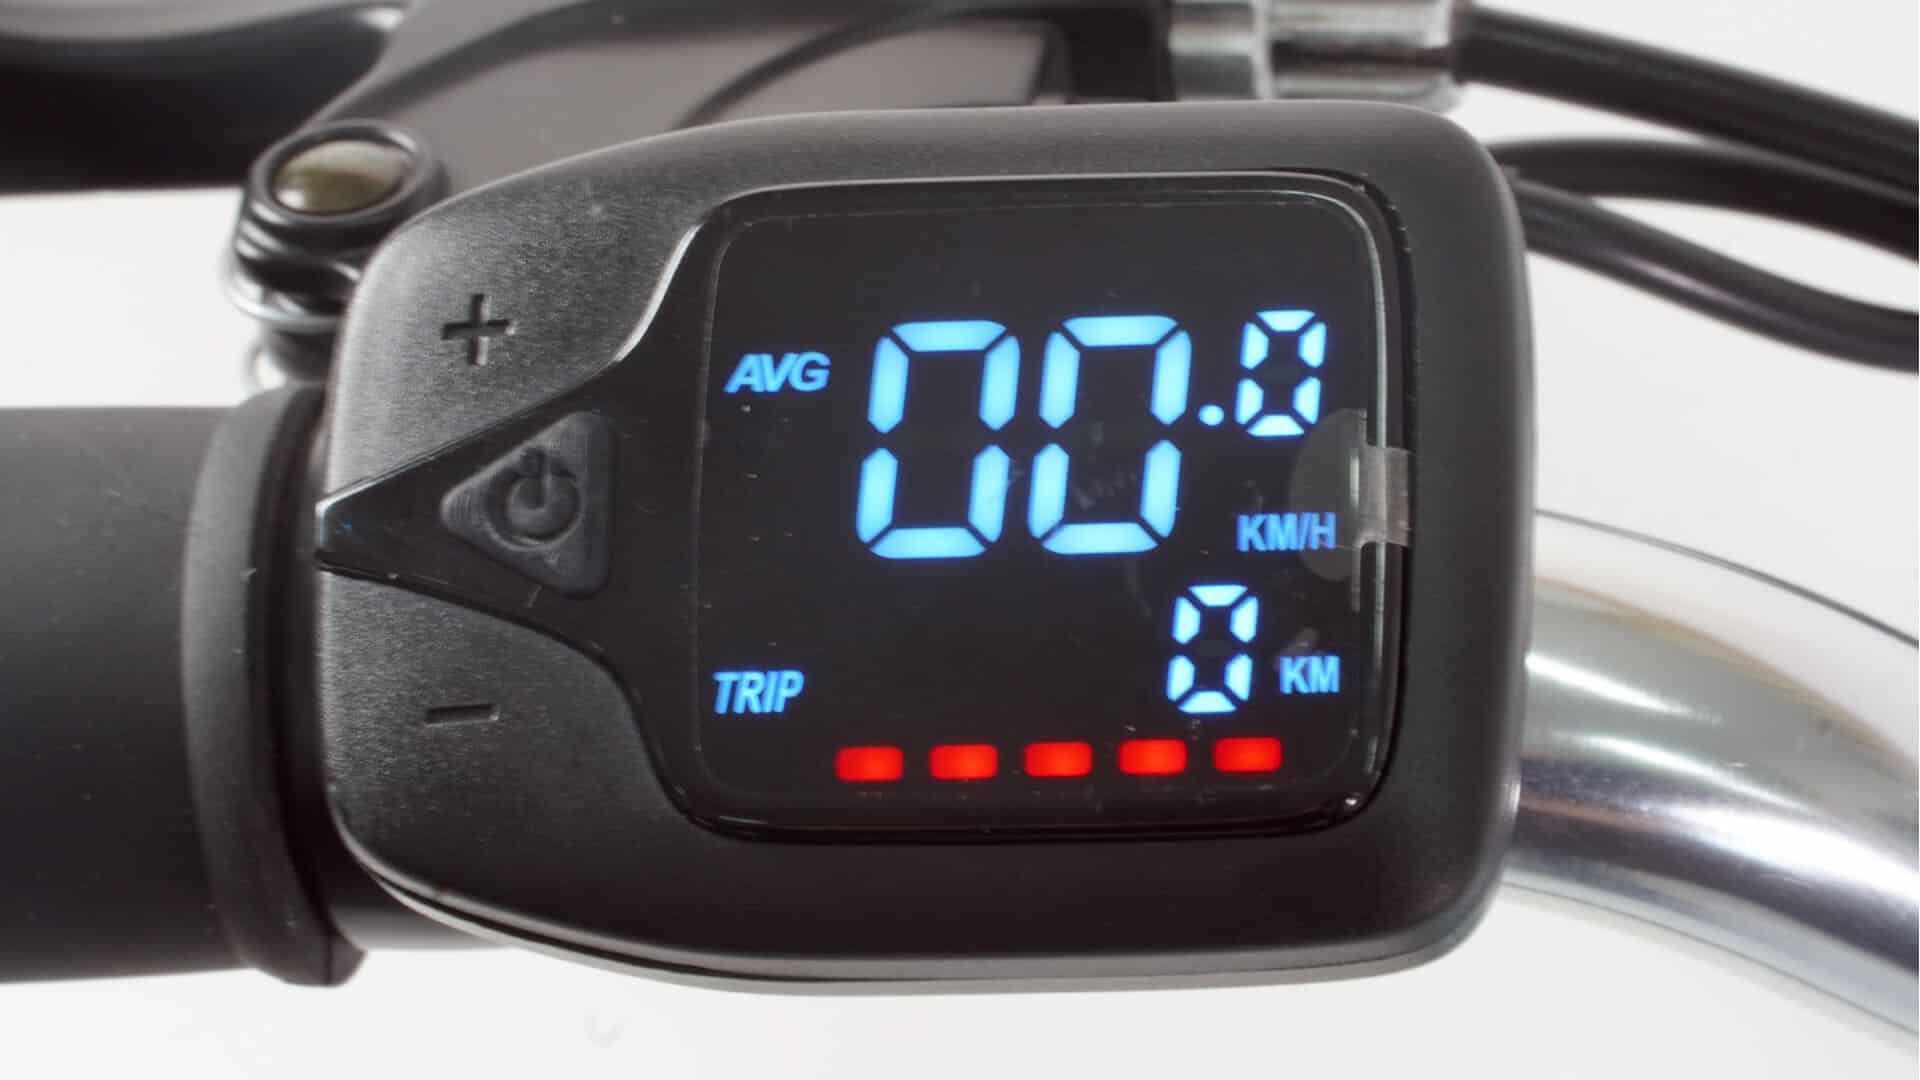 ECO DRIVE (BLACK) LTA approved electric bicycle close up front display meter